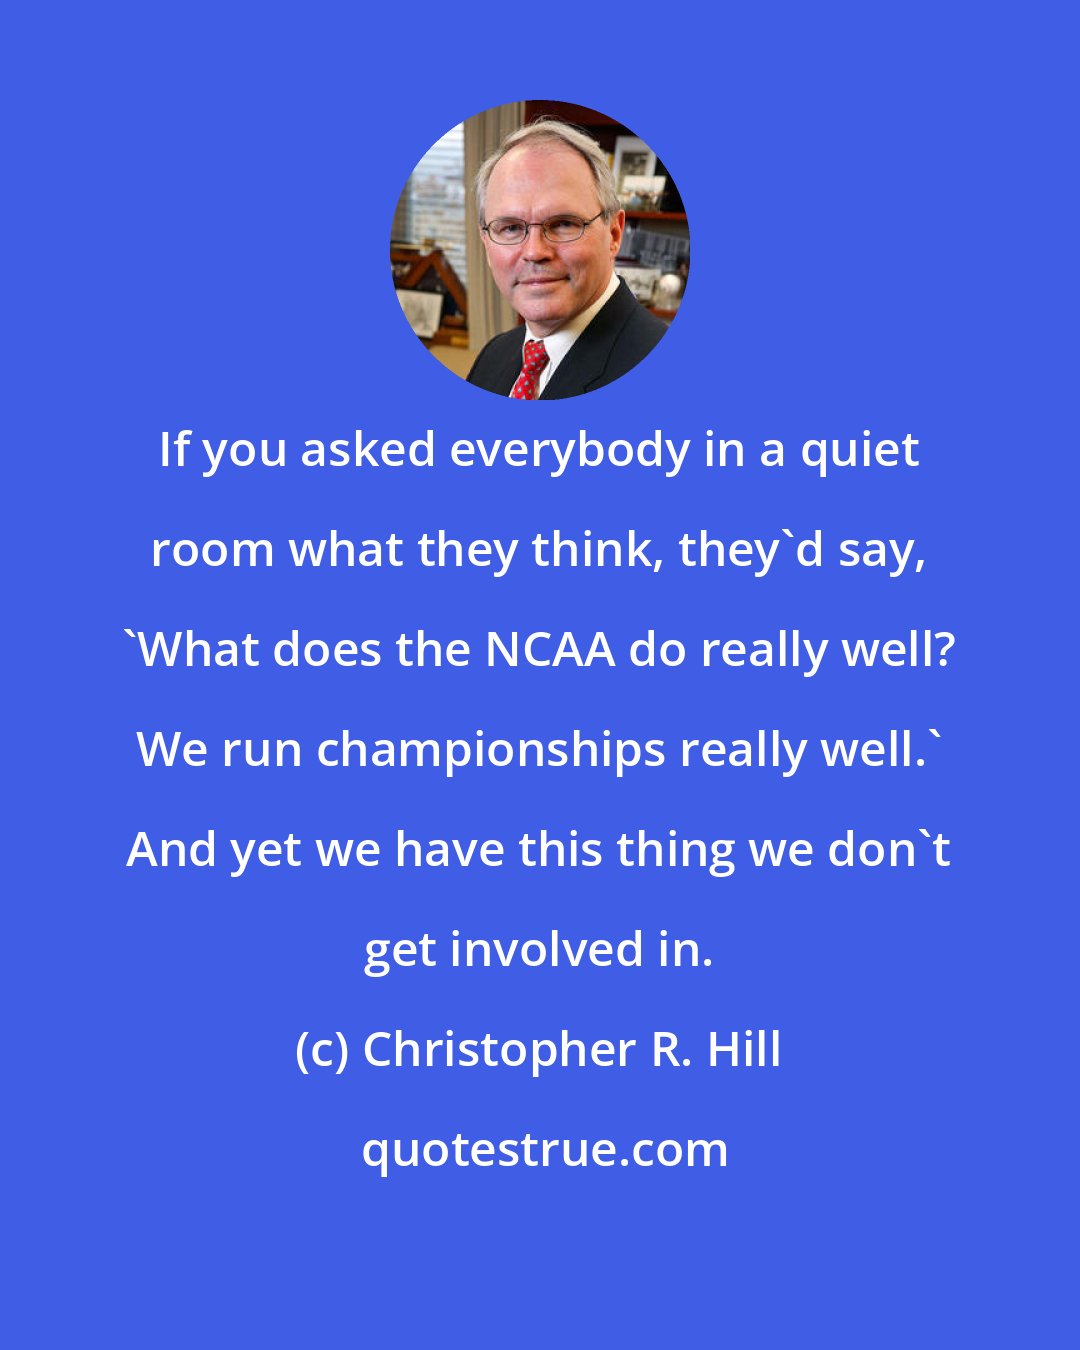 Christopher R. Hill: If you asked everybody in a quiet room what they think, they'd say, 'What does the NCAA do really well? We run championships really well.' And yet we have this thing we don't get involved in.